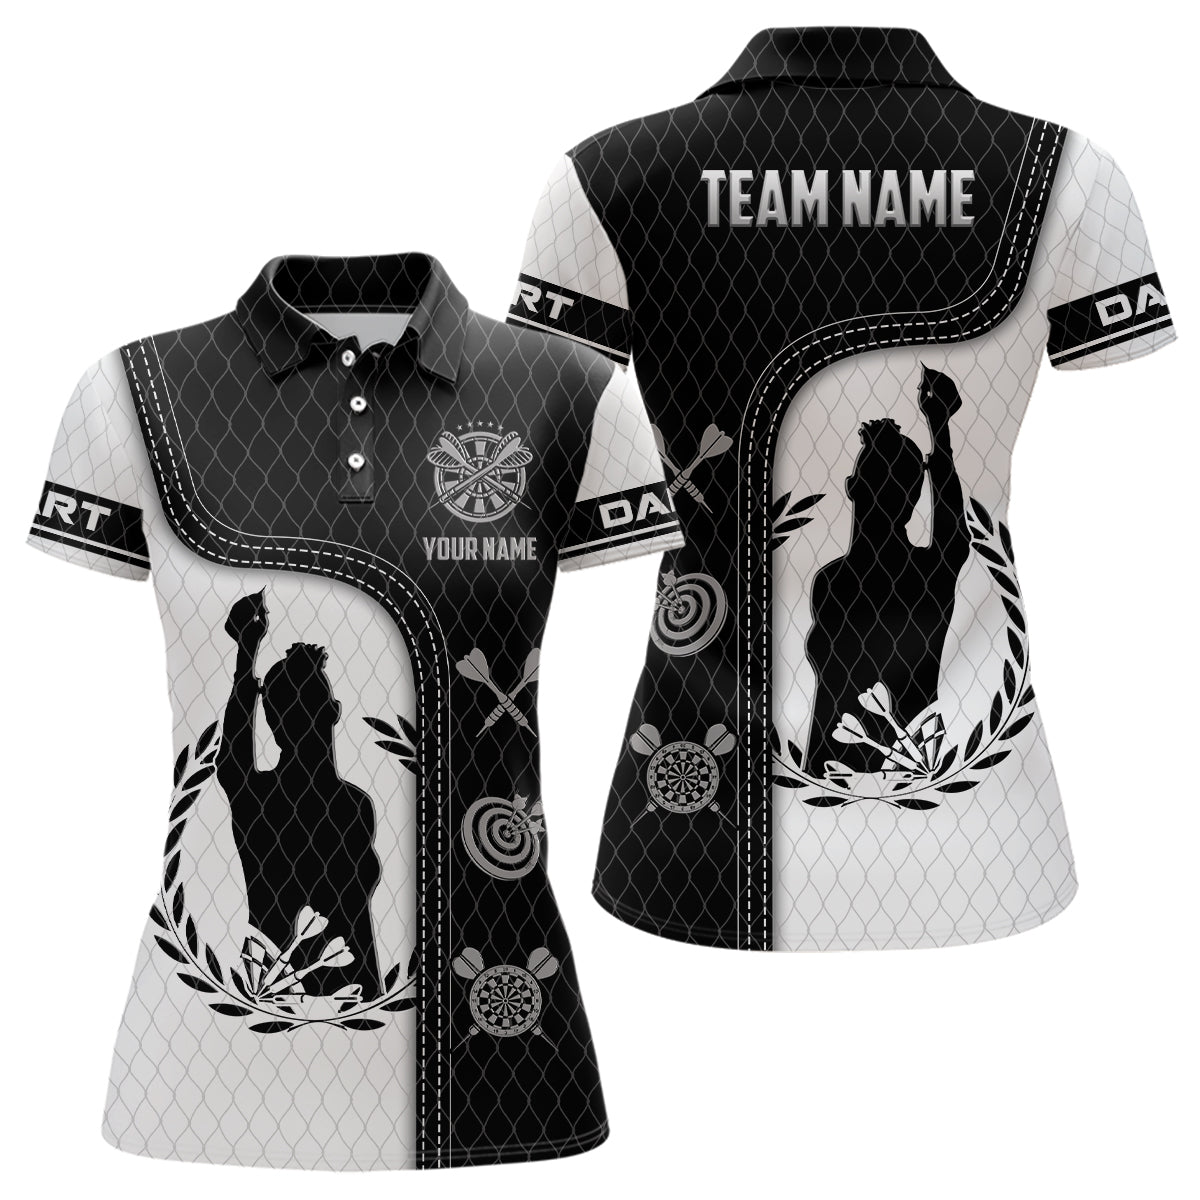 Women's Darts Shirt with 3D - Black and White - Ideal for Female Darts Players B969